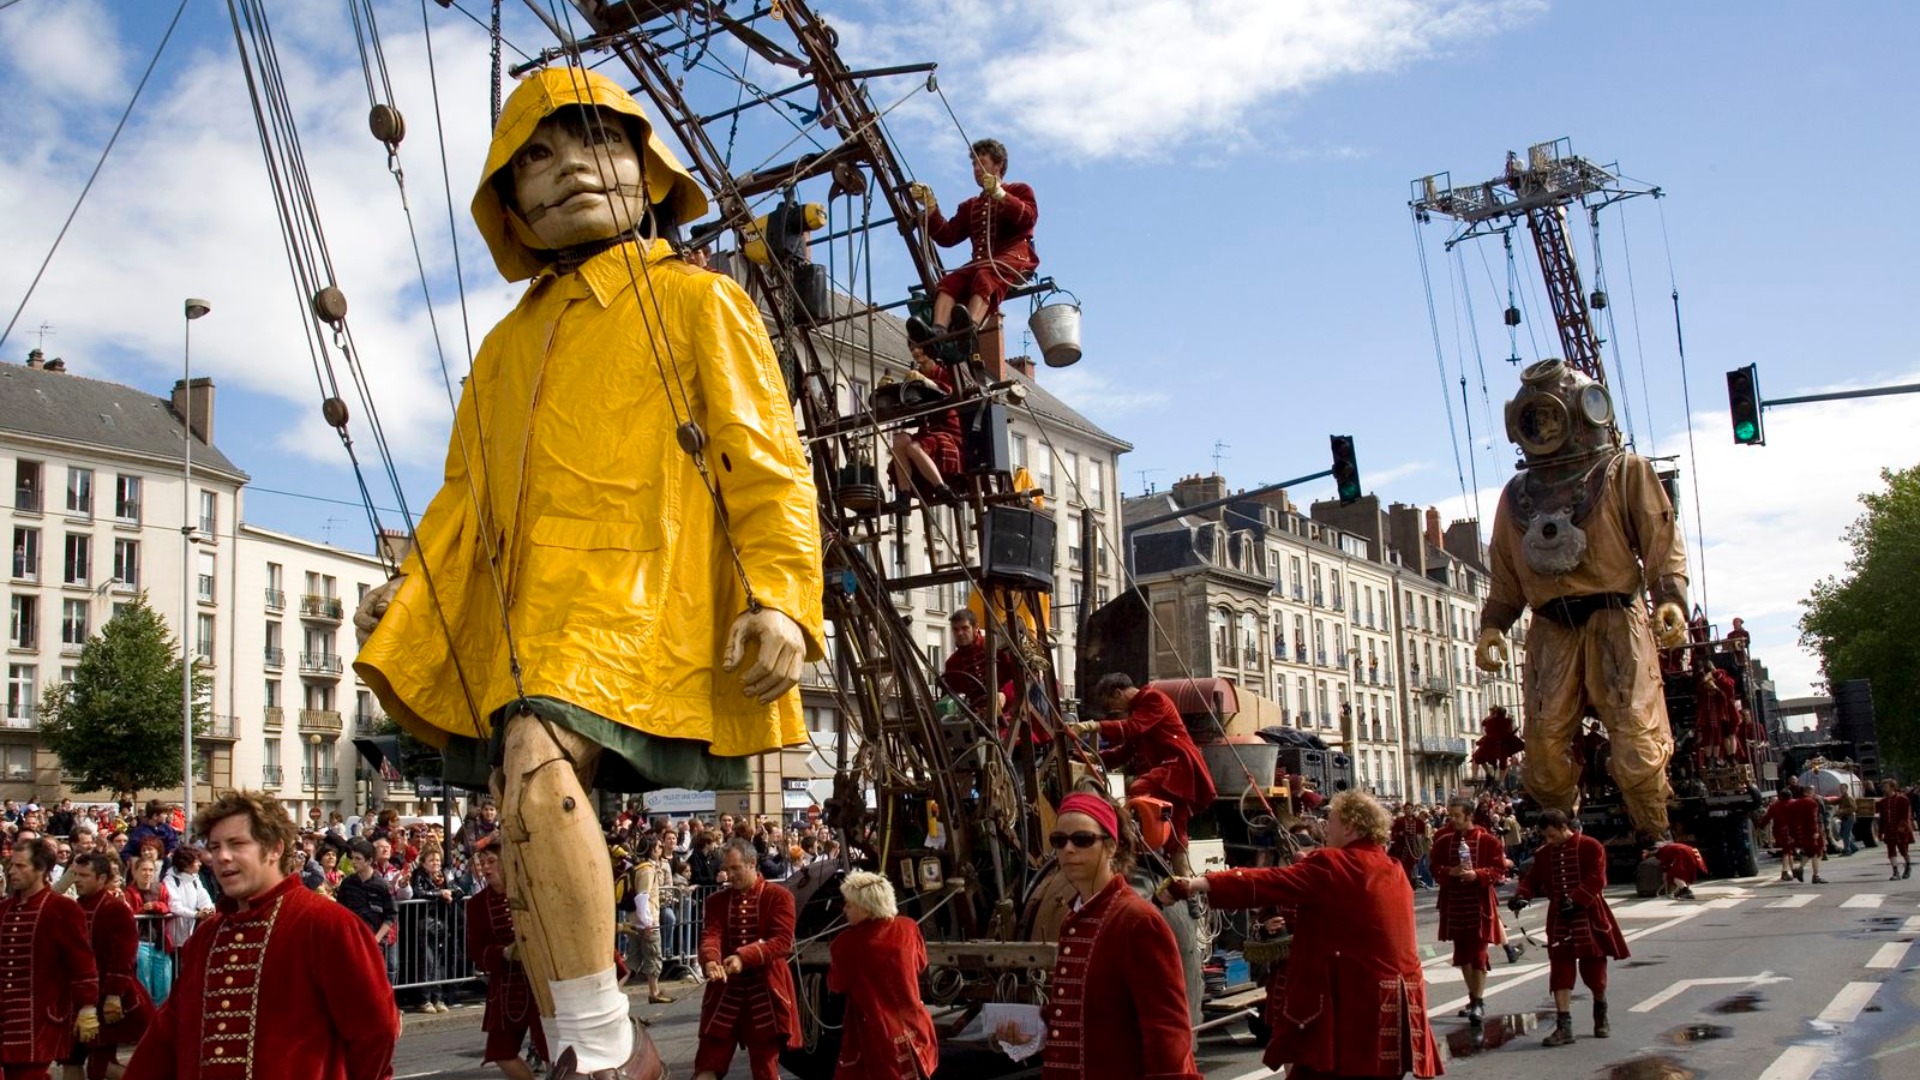 Royal De Luxe's Huge Puppets Outdoor Performances - Where To See The Shows